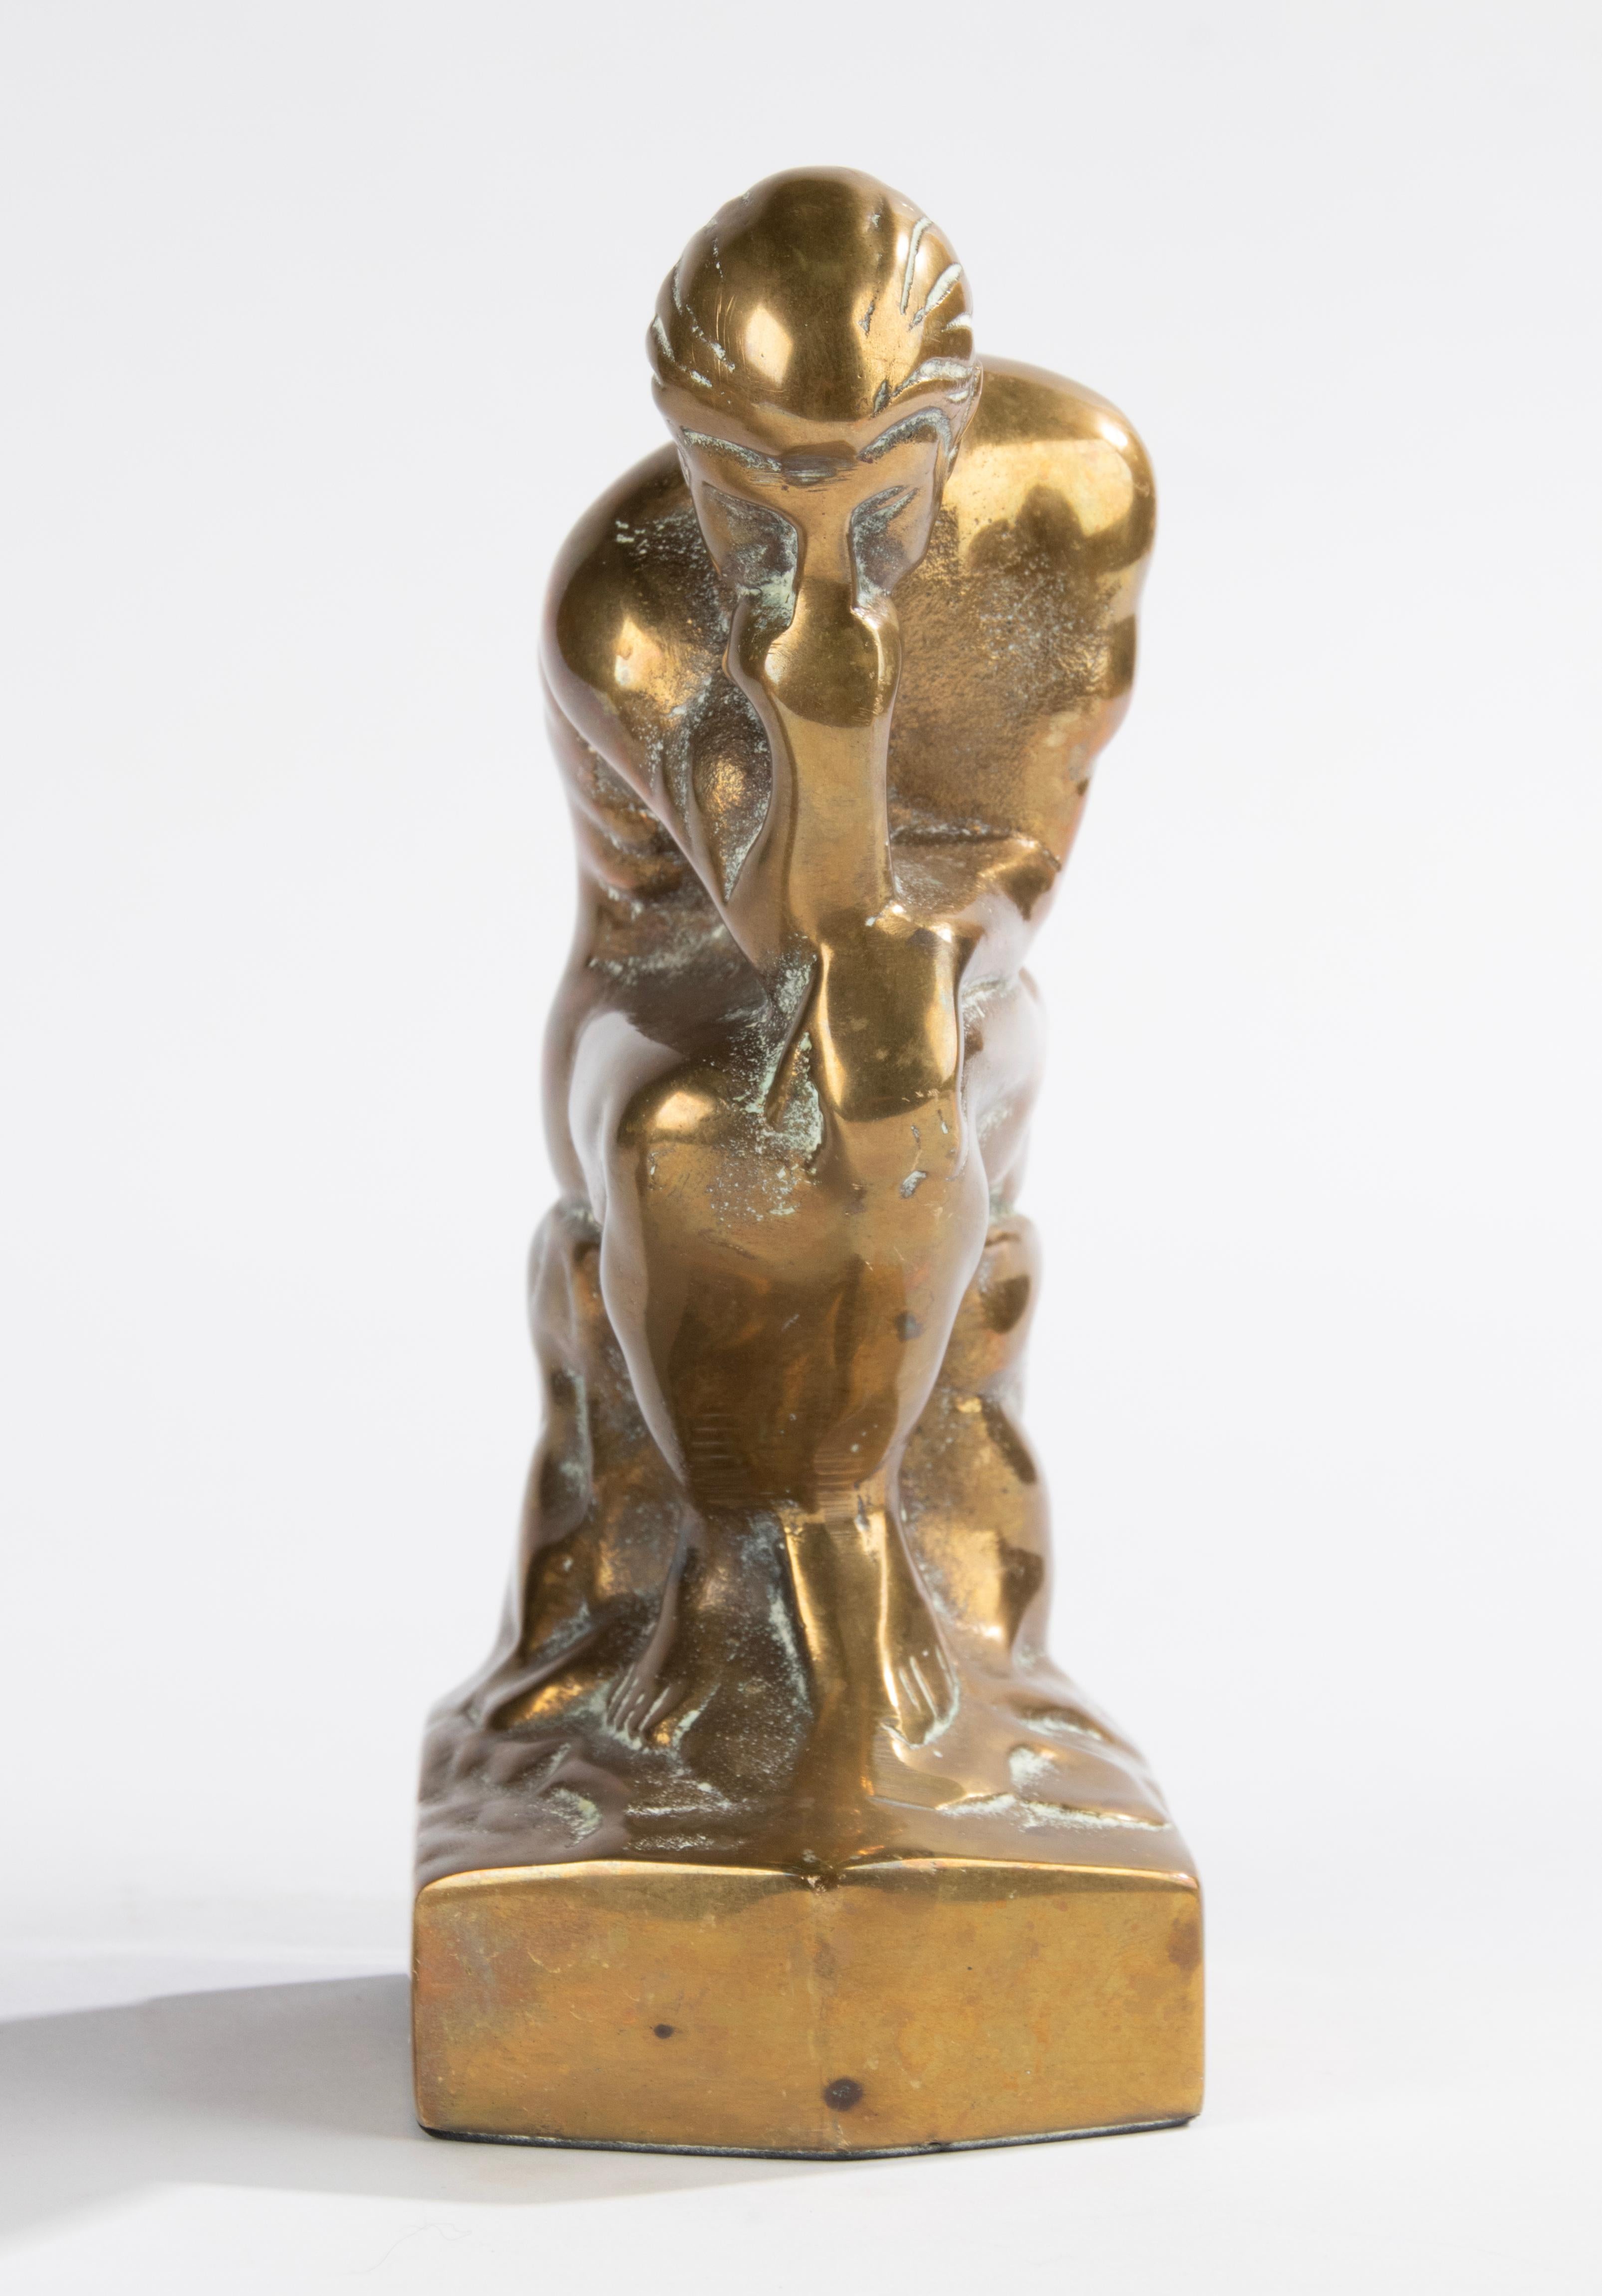 Mid-20th Century Brass Bookends Inspired by 'the Thinker' from Auguste Rodin For Sale 4